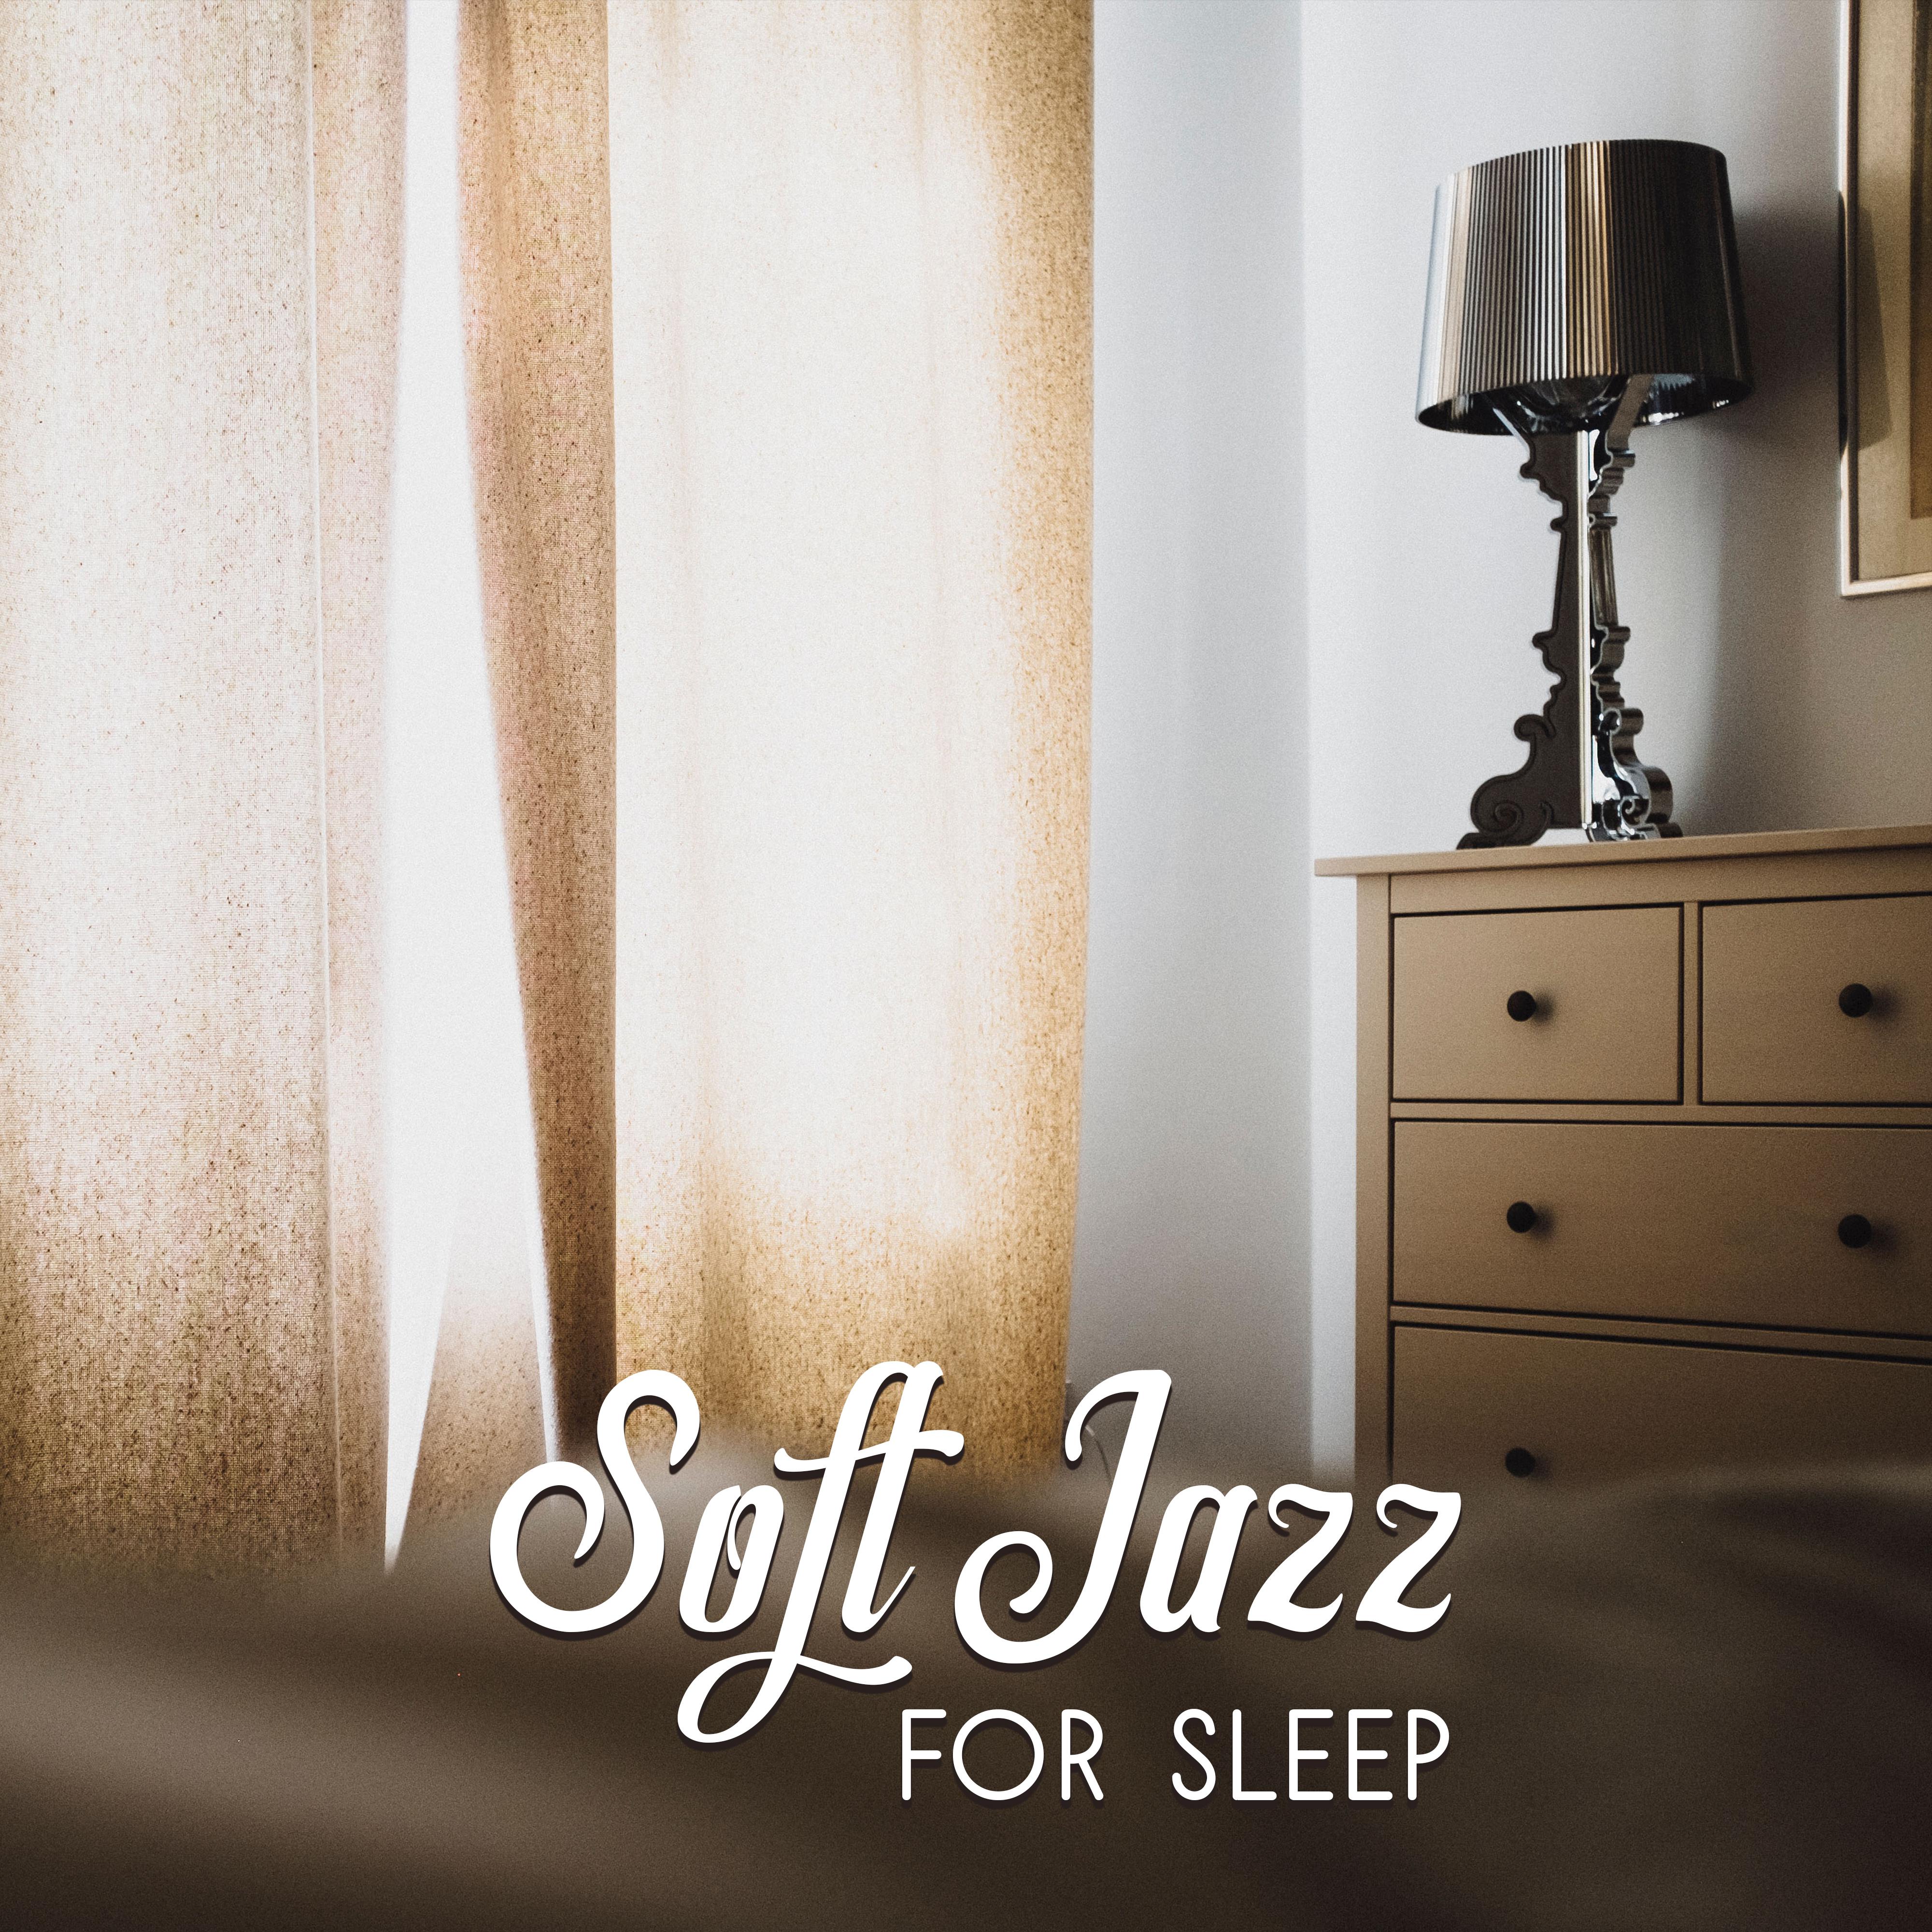 Soft Jazz for Sleep – Chilled Jazz, Soothing Sounds for Relaxation, Healing Music to Calm Down, Gentle Lullabies at Night, Mellow Jazz, Restful Sleep